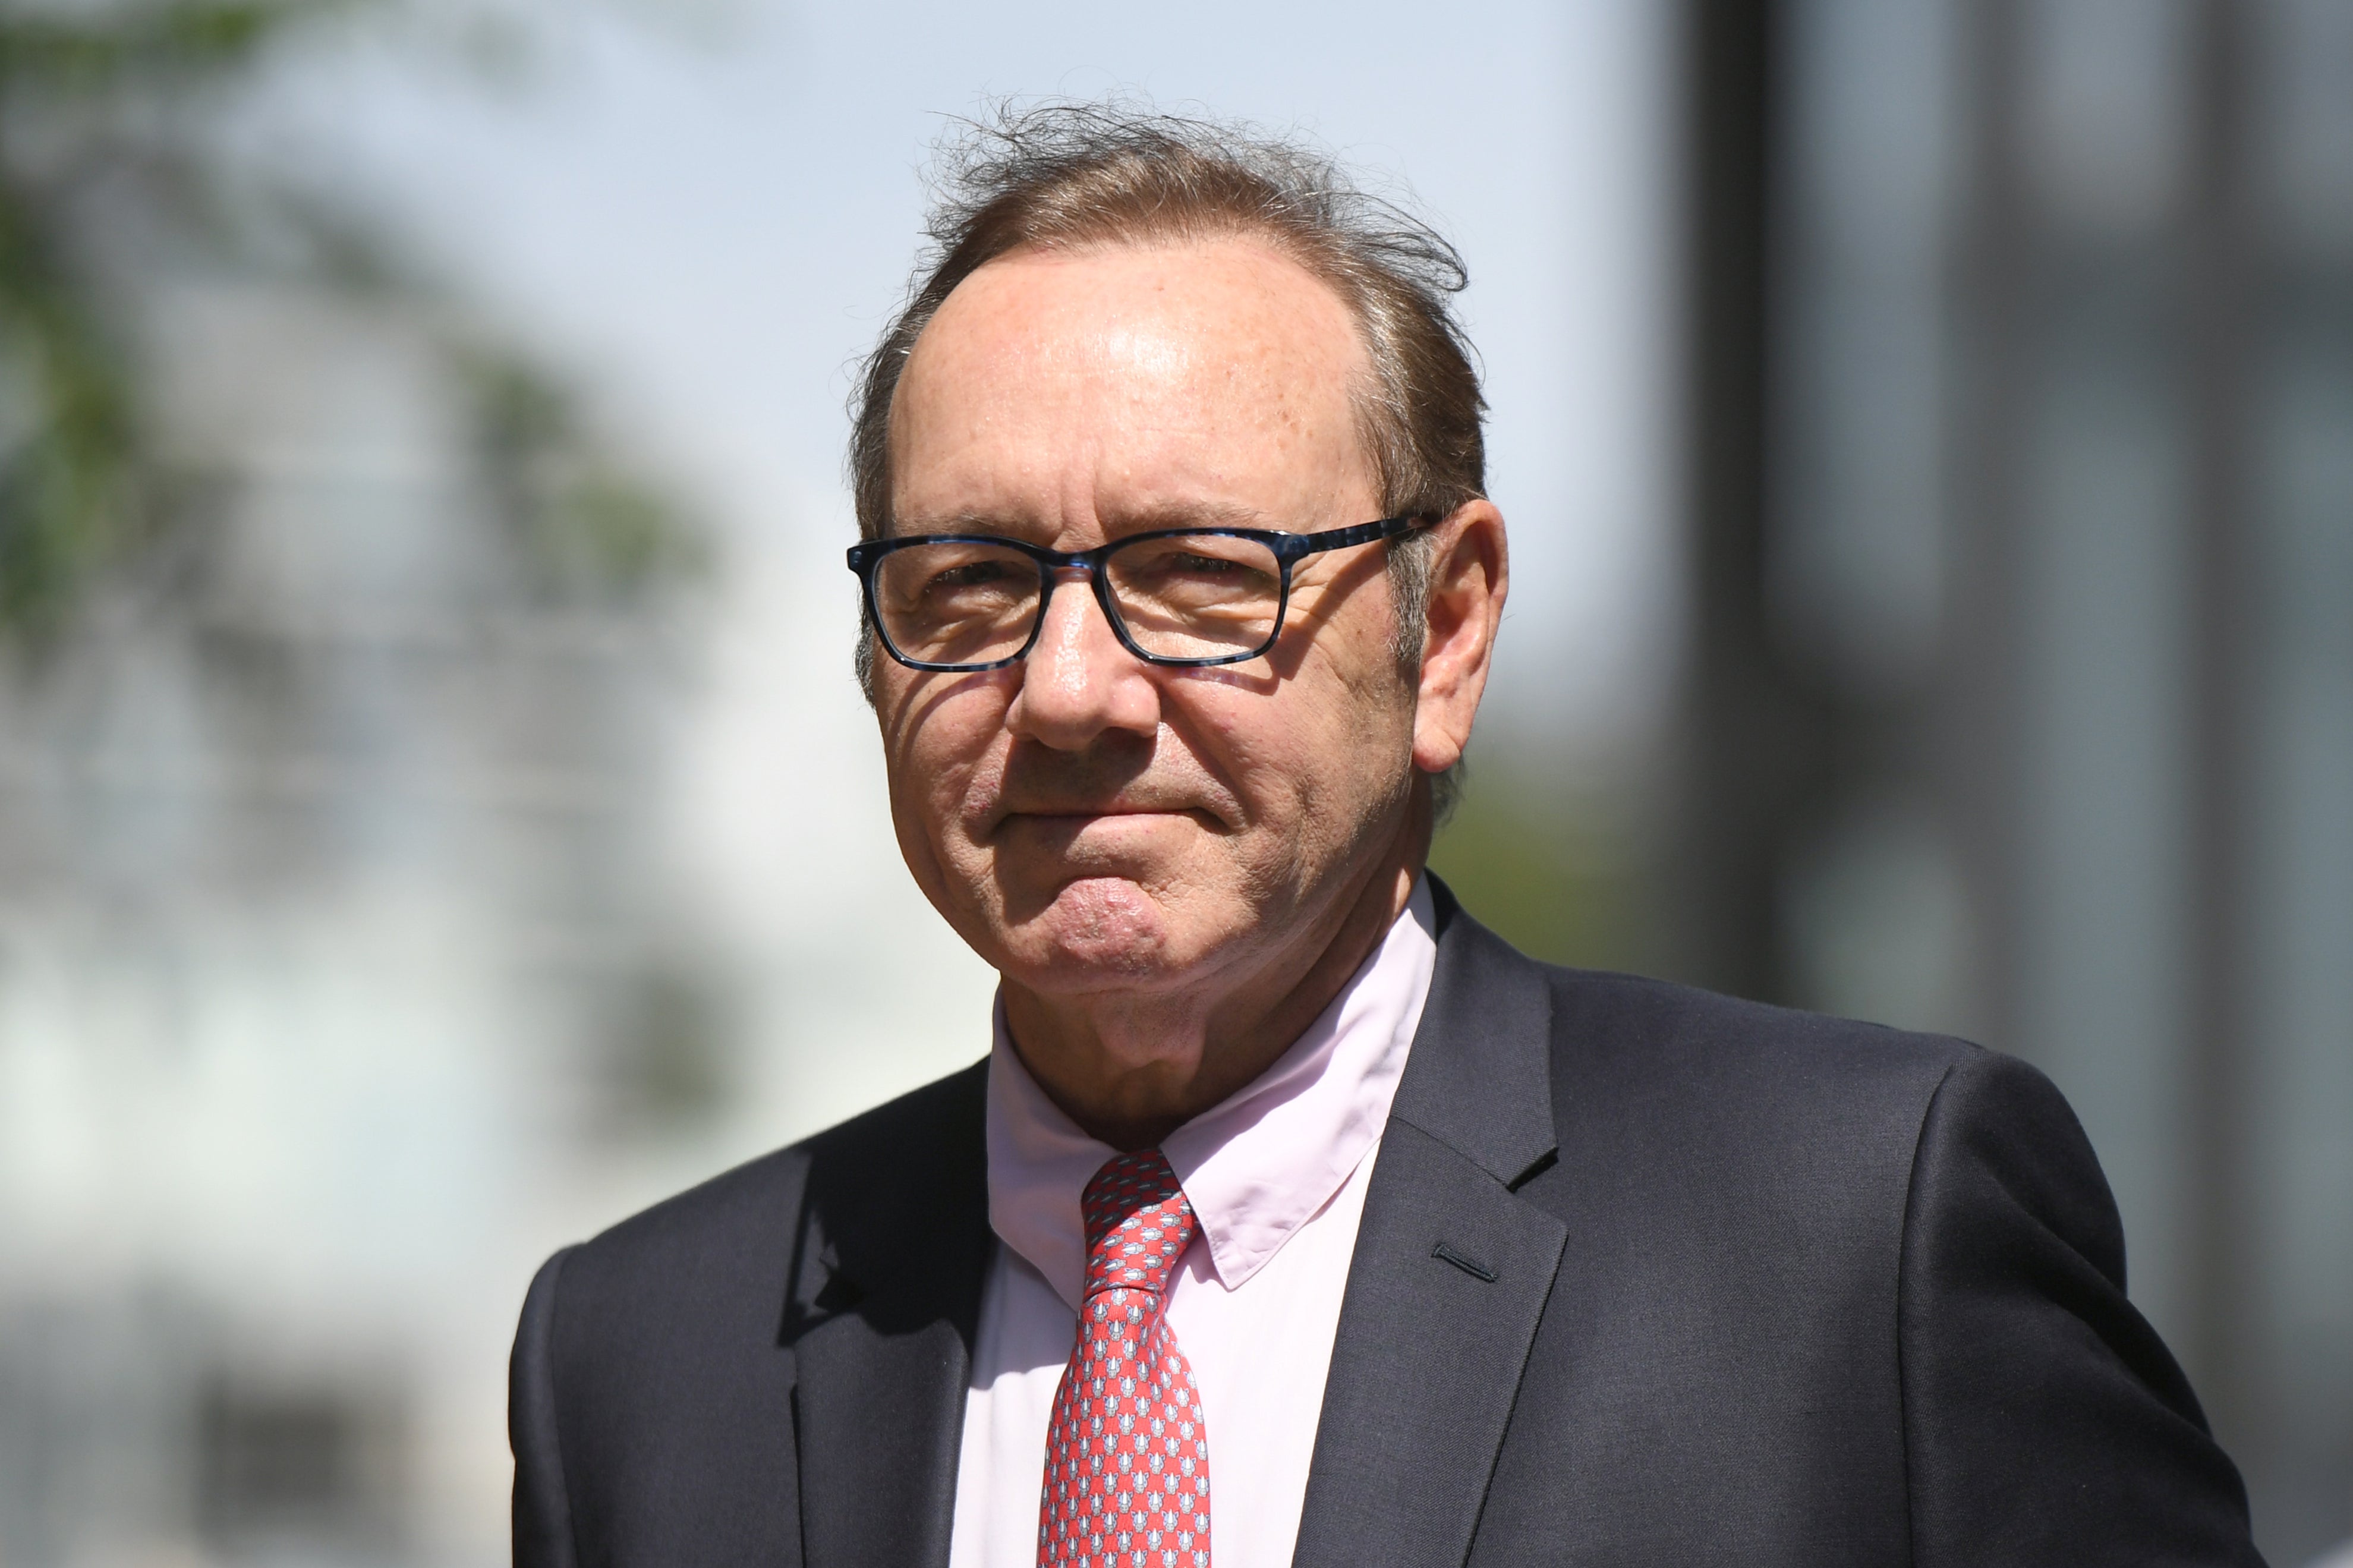 Kevin Spacey at Southwark Crown Court for his sexual assault trial in 2023